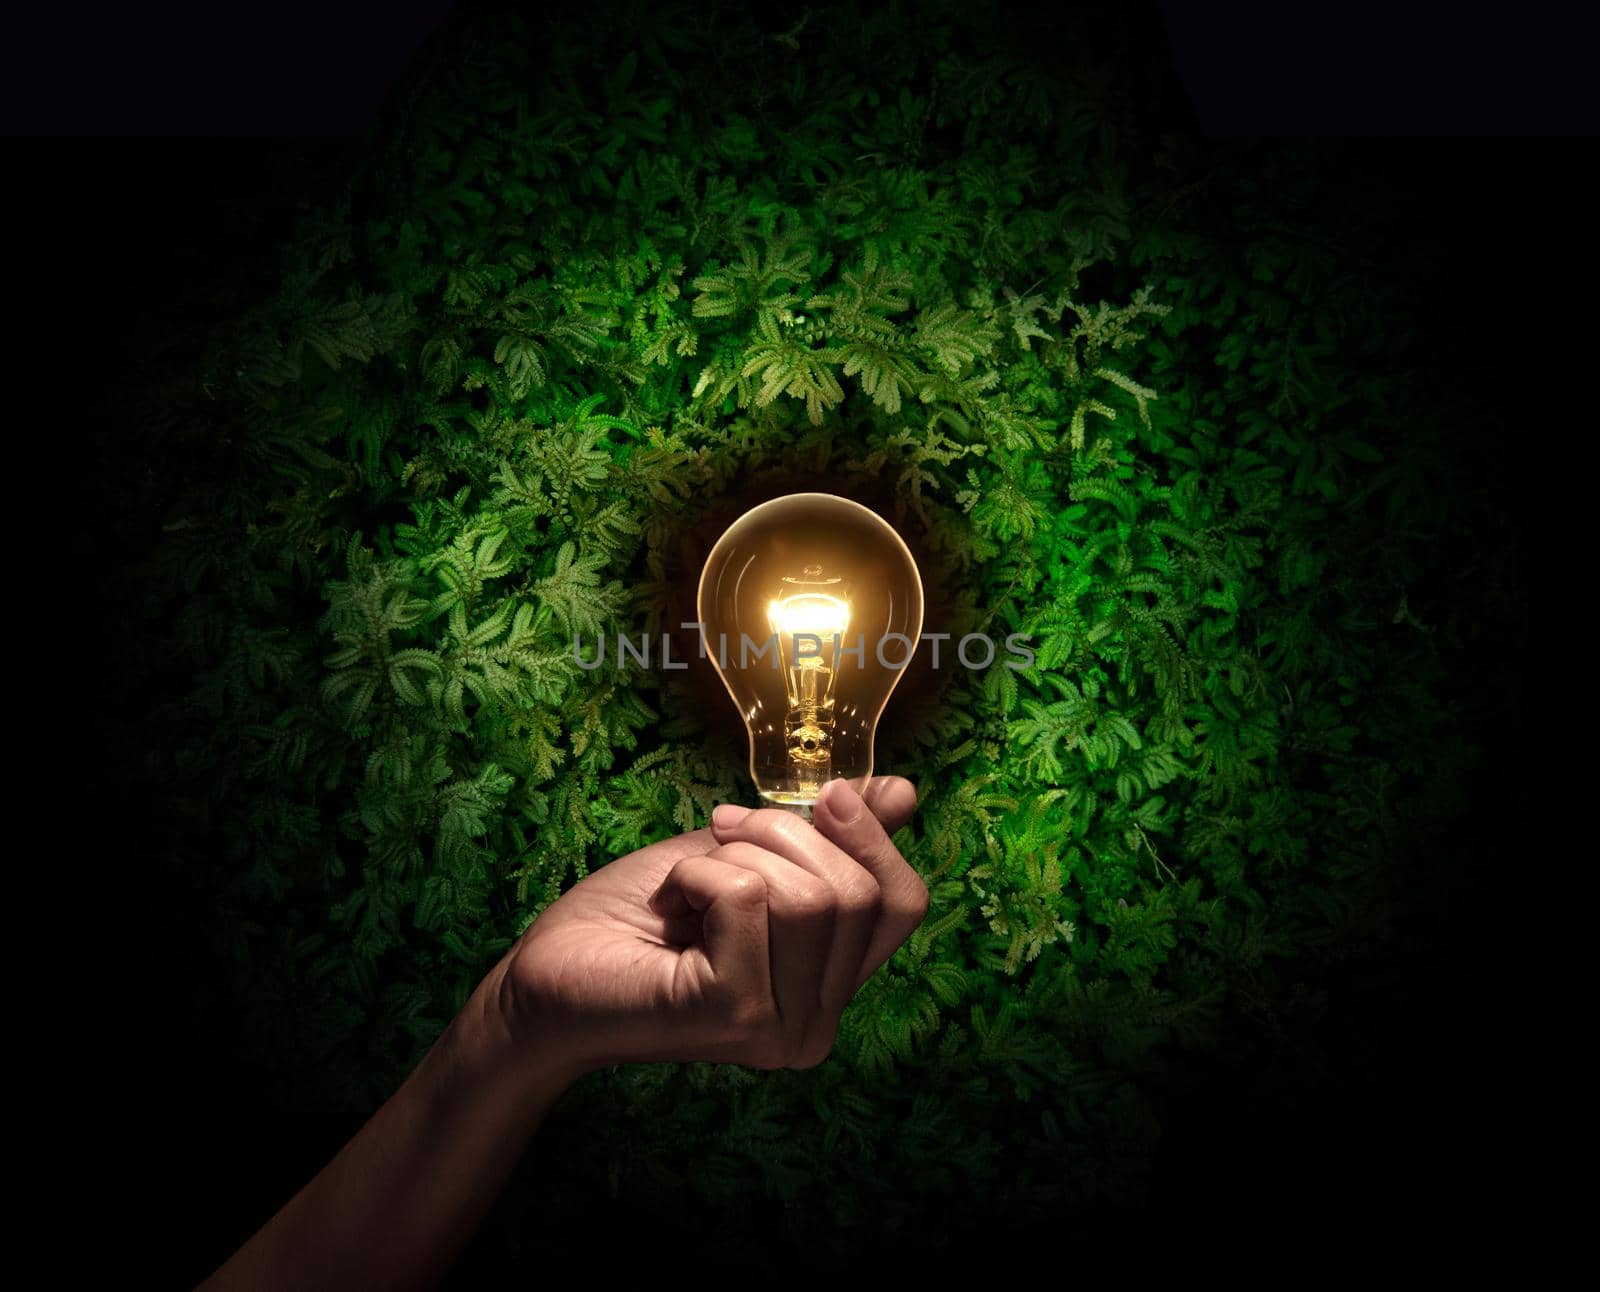 hand holding a light bulb with fresh green leaves inside on nature background. Concept save energy efficiency.